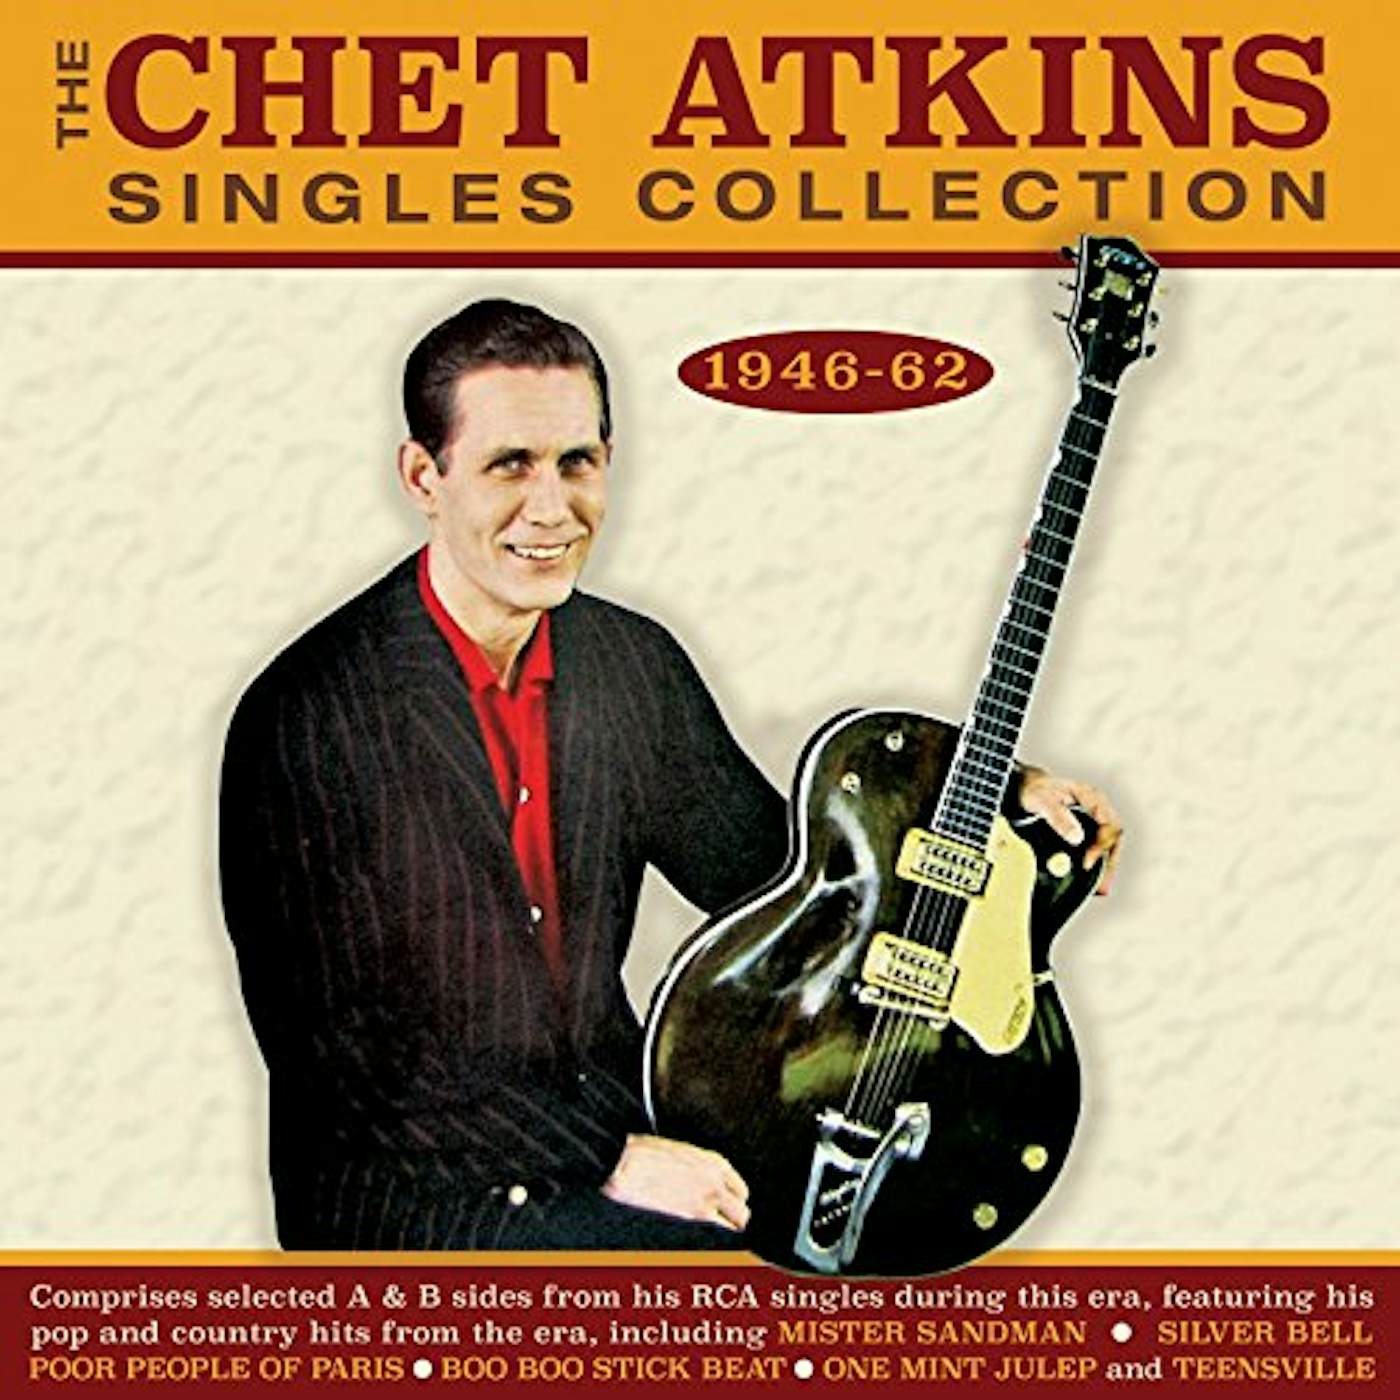 Chet Atkins SINGLES COLLECTION 1946-62 CD